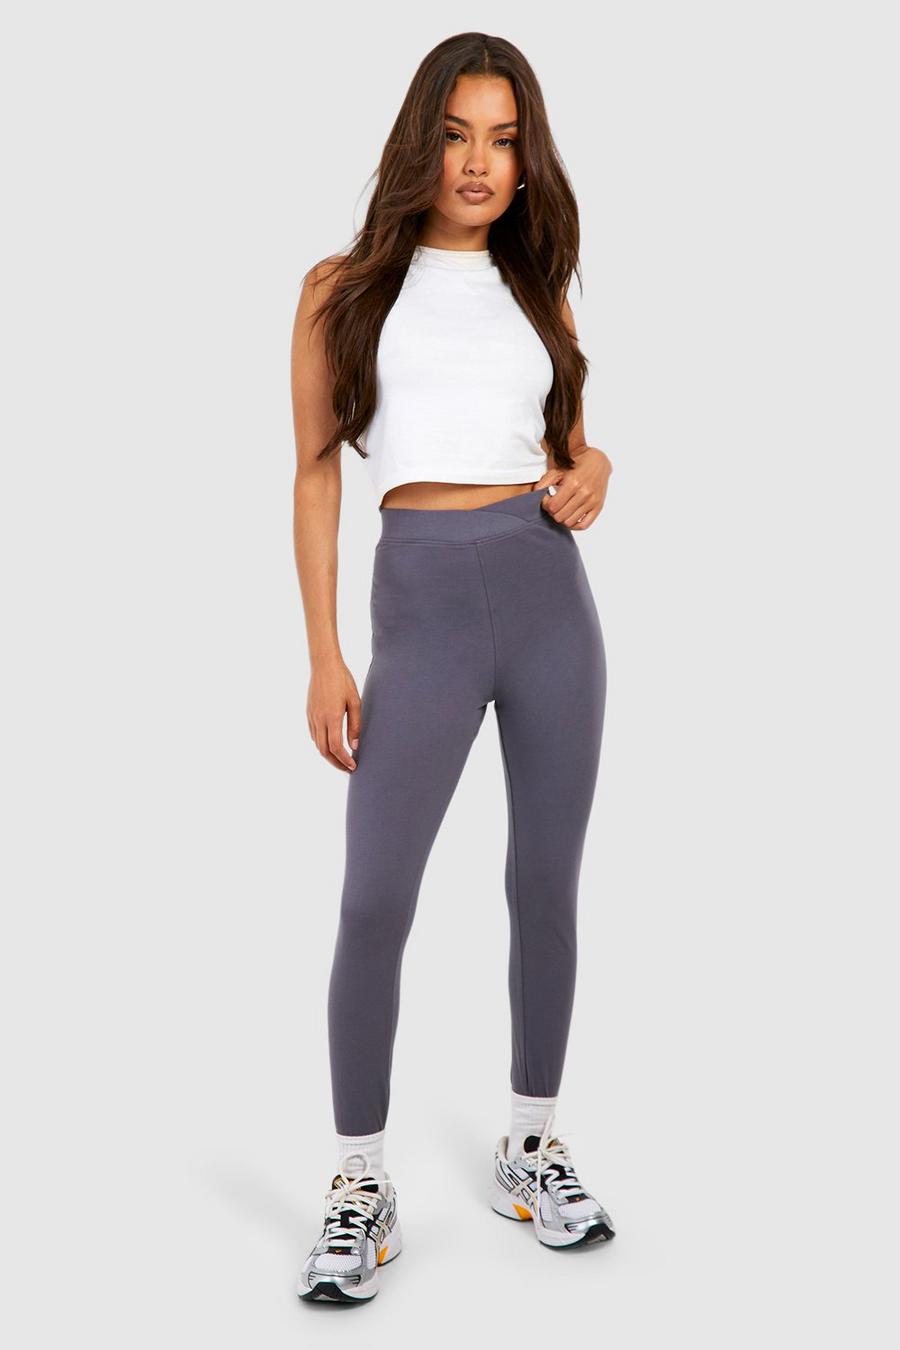 Charcoal Cotton Jersey Knit Wrap High Waisted Leggings